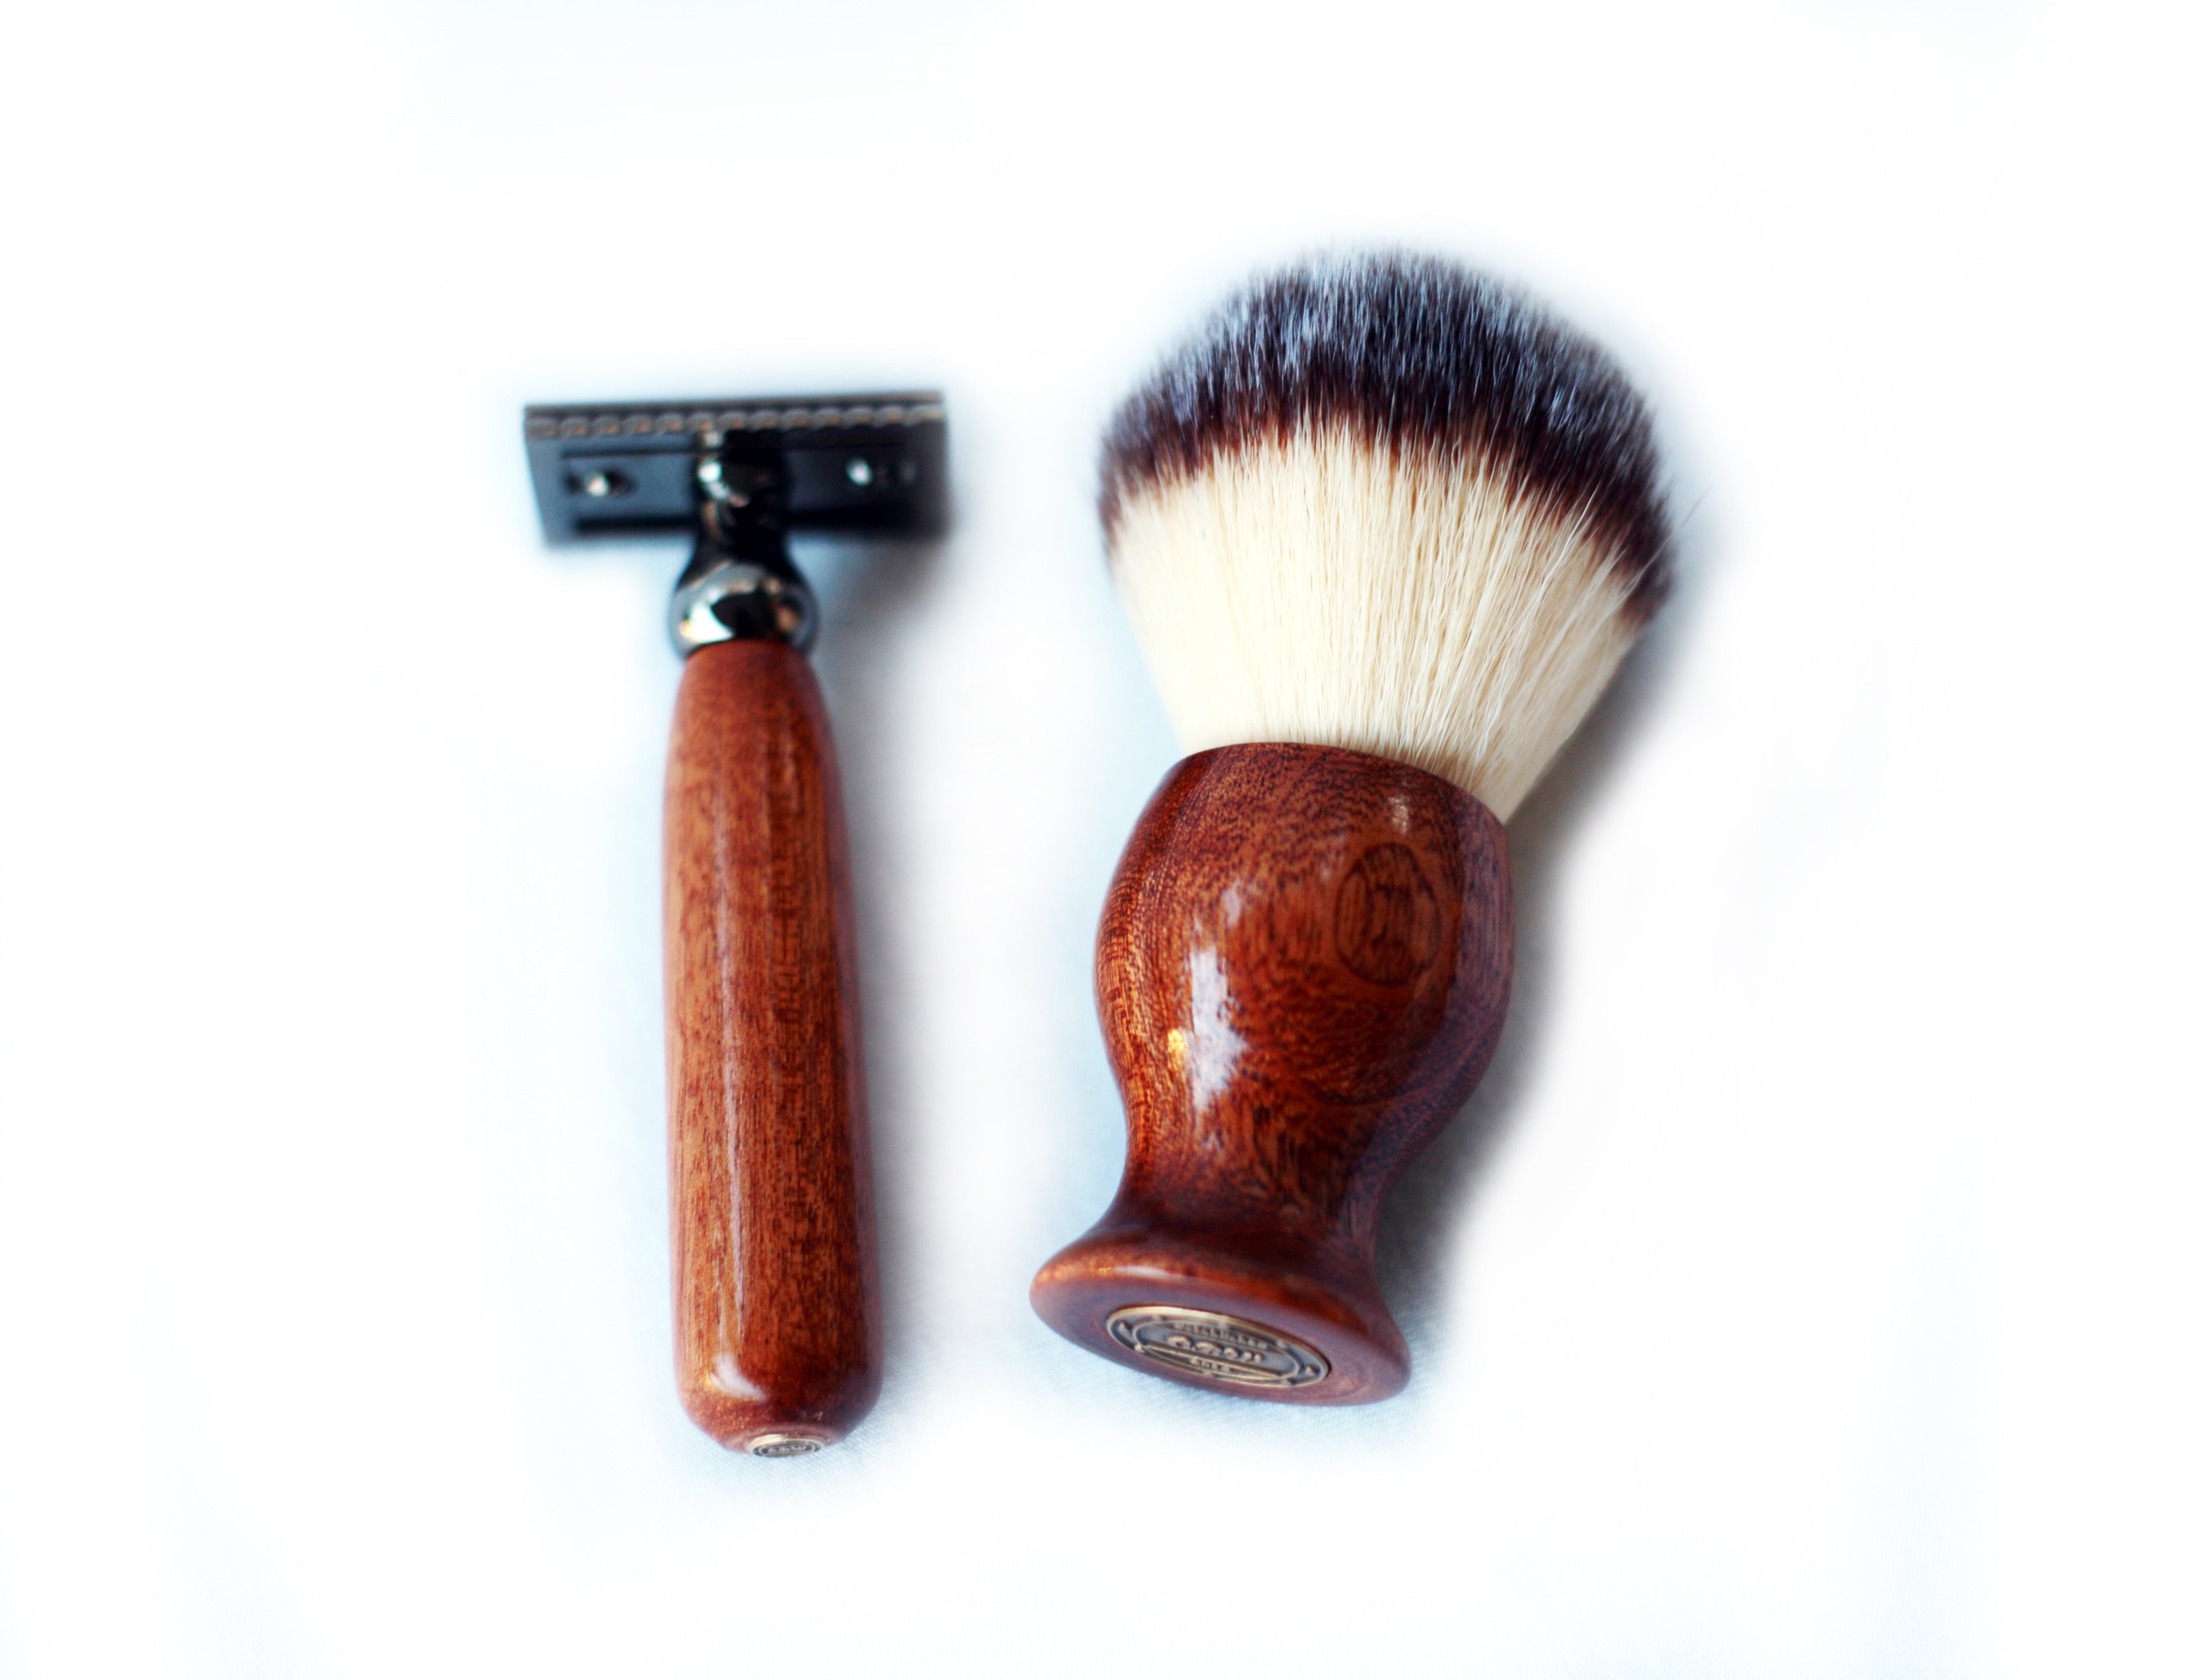 Mahogany Shave Set with Gunmetal safety razor, 26mm lather brush and a matching shave stand. - CreationsByWill